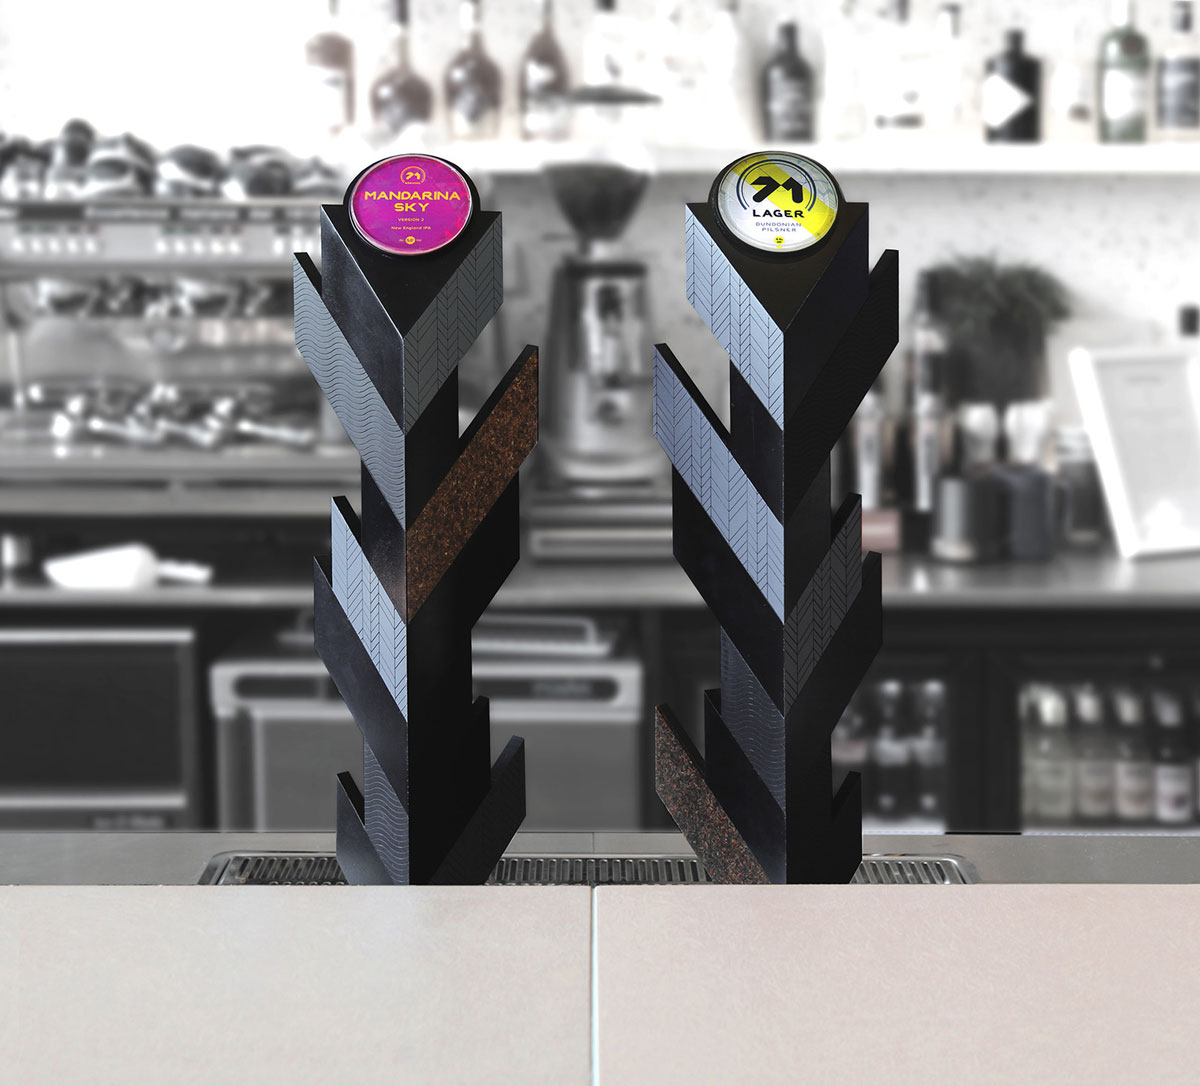 Beer taps installed in the V&A Dundee bar. Two angular taps side by side on a bar top. The different facets of the design use various materials etched with a geometric pattern.